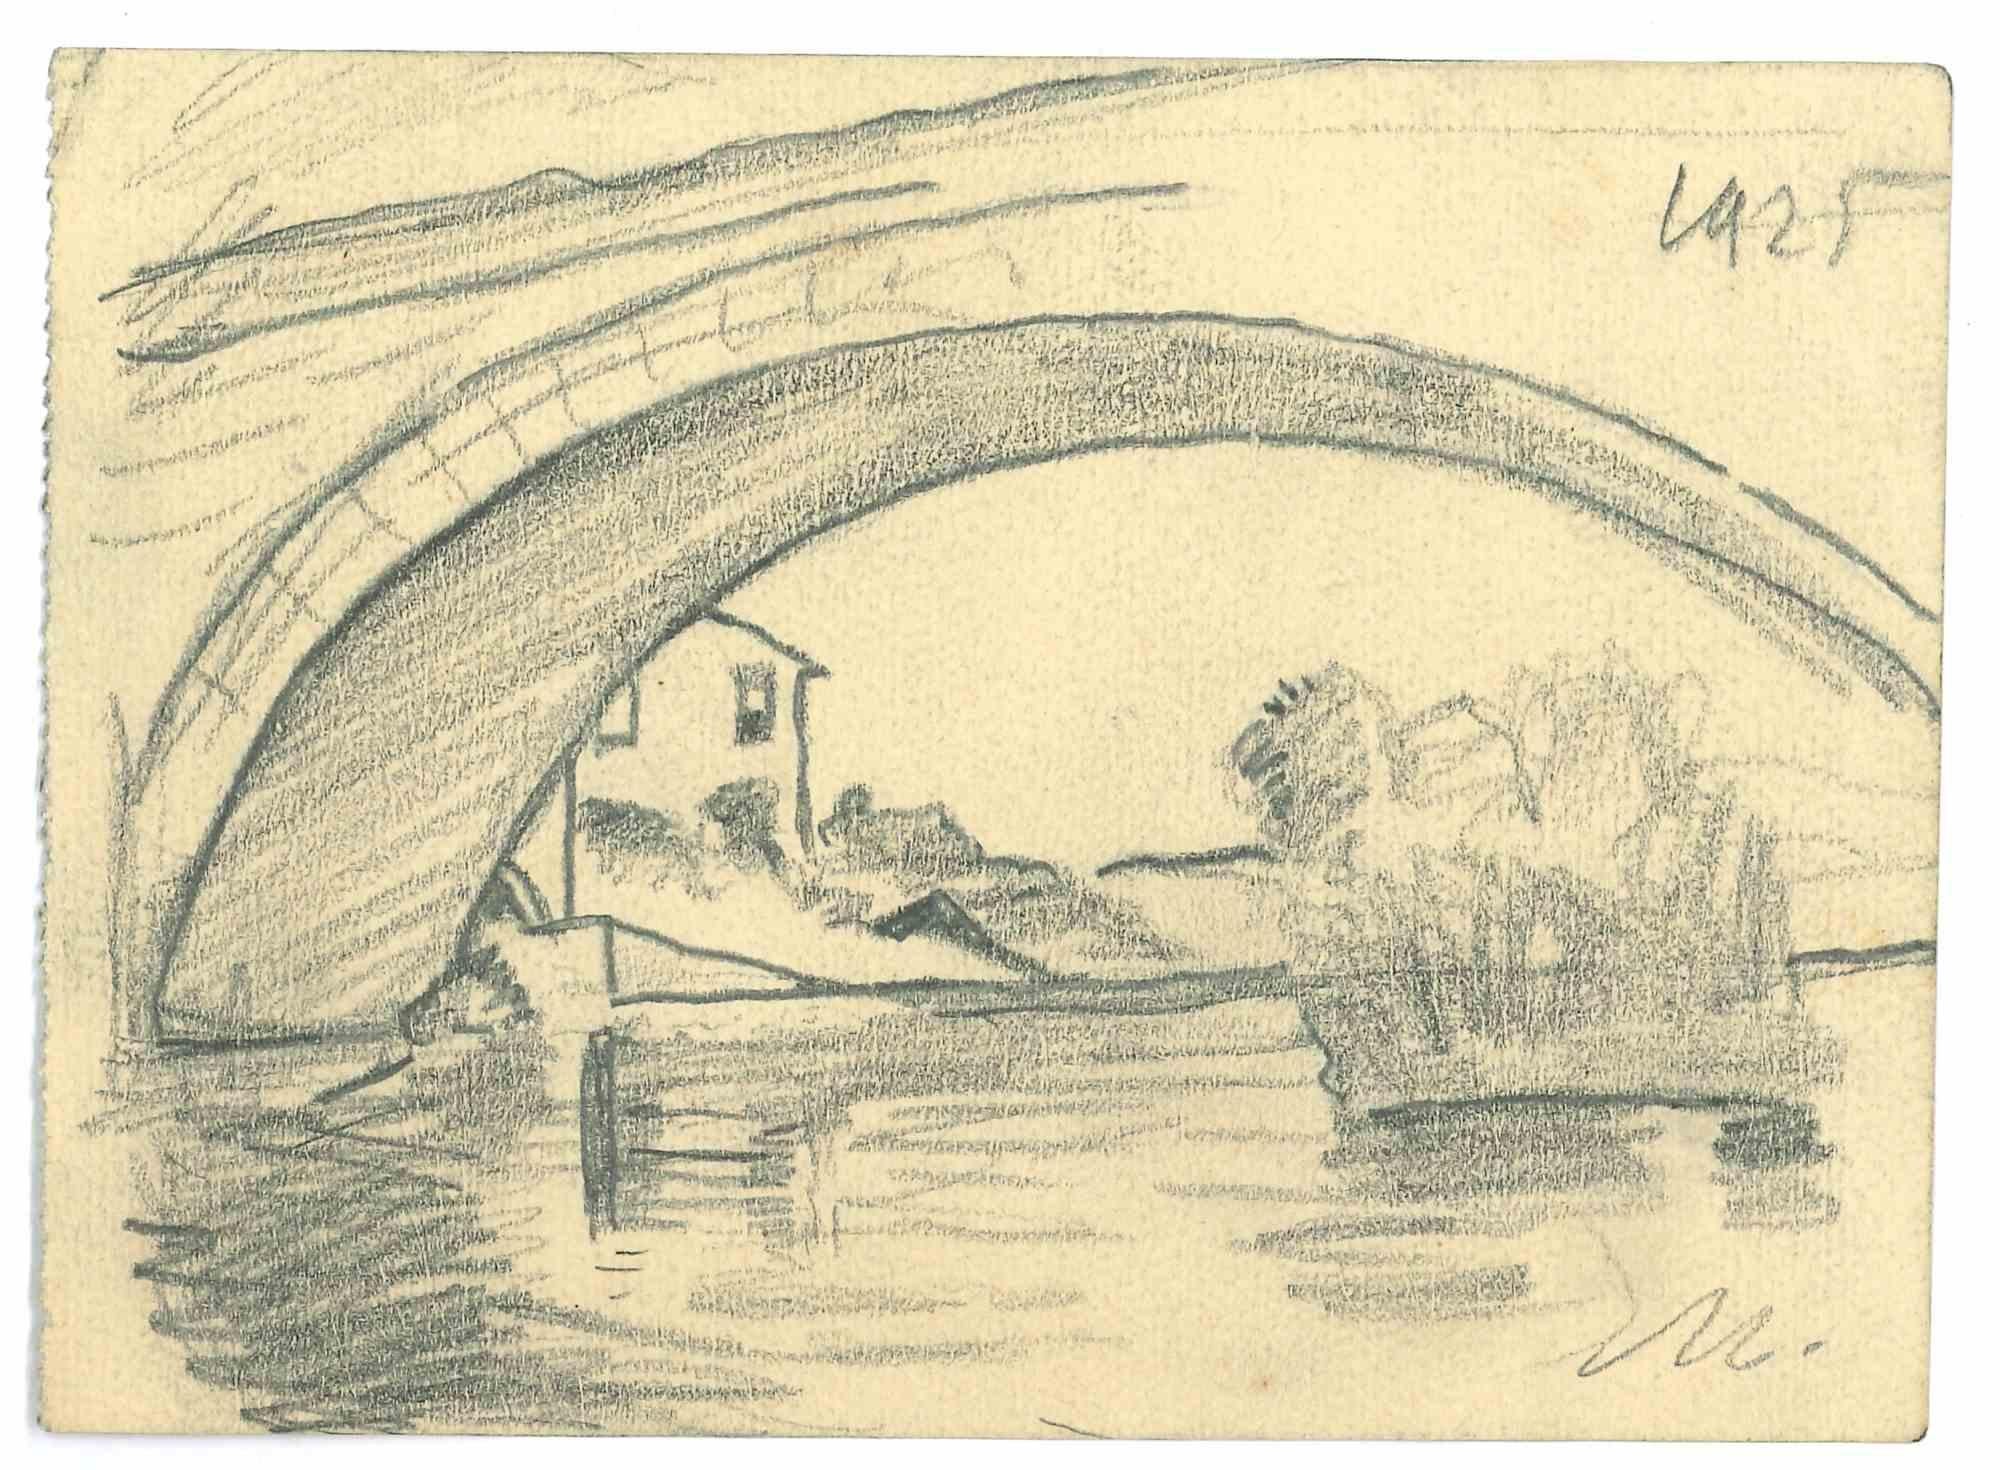 Landscape is a pencil Drawing realized by Mino Maccari  (1924-1989) in the Mid-20th Century.

Hand-signed on the lower.

Good conditions.

Mino Maccari (Siena, 1924-Rome, June 16, 1989) was an Italian writer, painter, engraver and journalist, winner